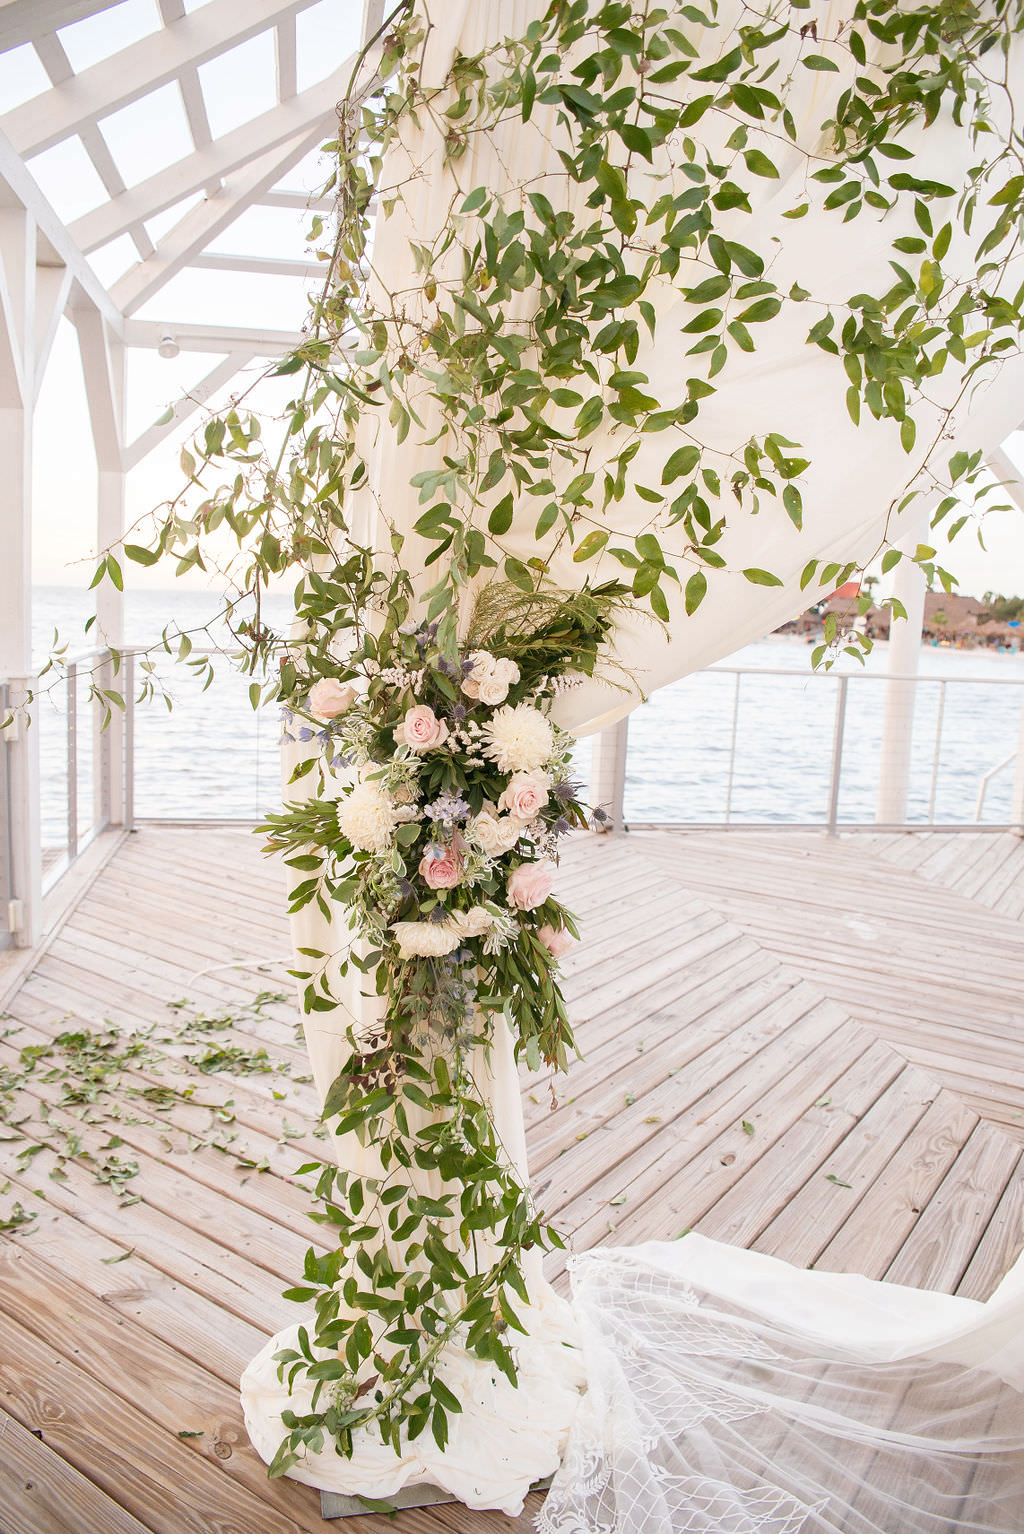 Florida Outdoor Waterfront Wedding Ceremony Decor, Arch with White Linen Drapery and Greenery Leaves and Ivory and Blush Pink Florals | Tampa Wedding Photographer Kristen Marie Photography | Tampa Wedding Venue The Godfrey | Draping Rentals Gabro Event Services